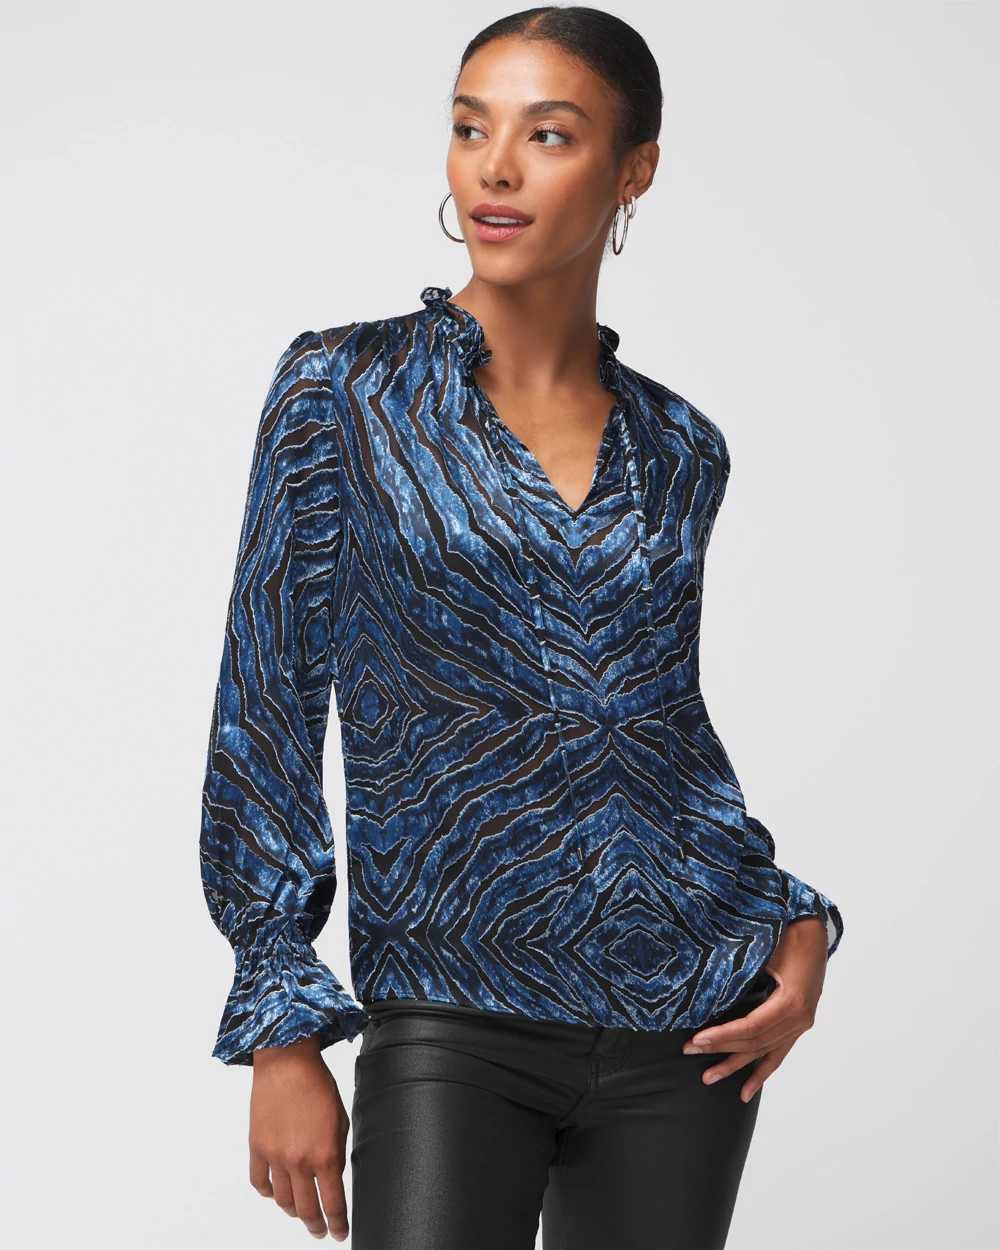 Long Sleeve Silk Burnout Tie Blouse click to view larger image.